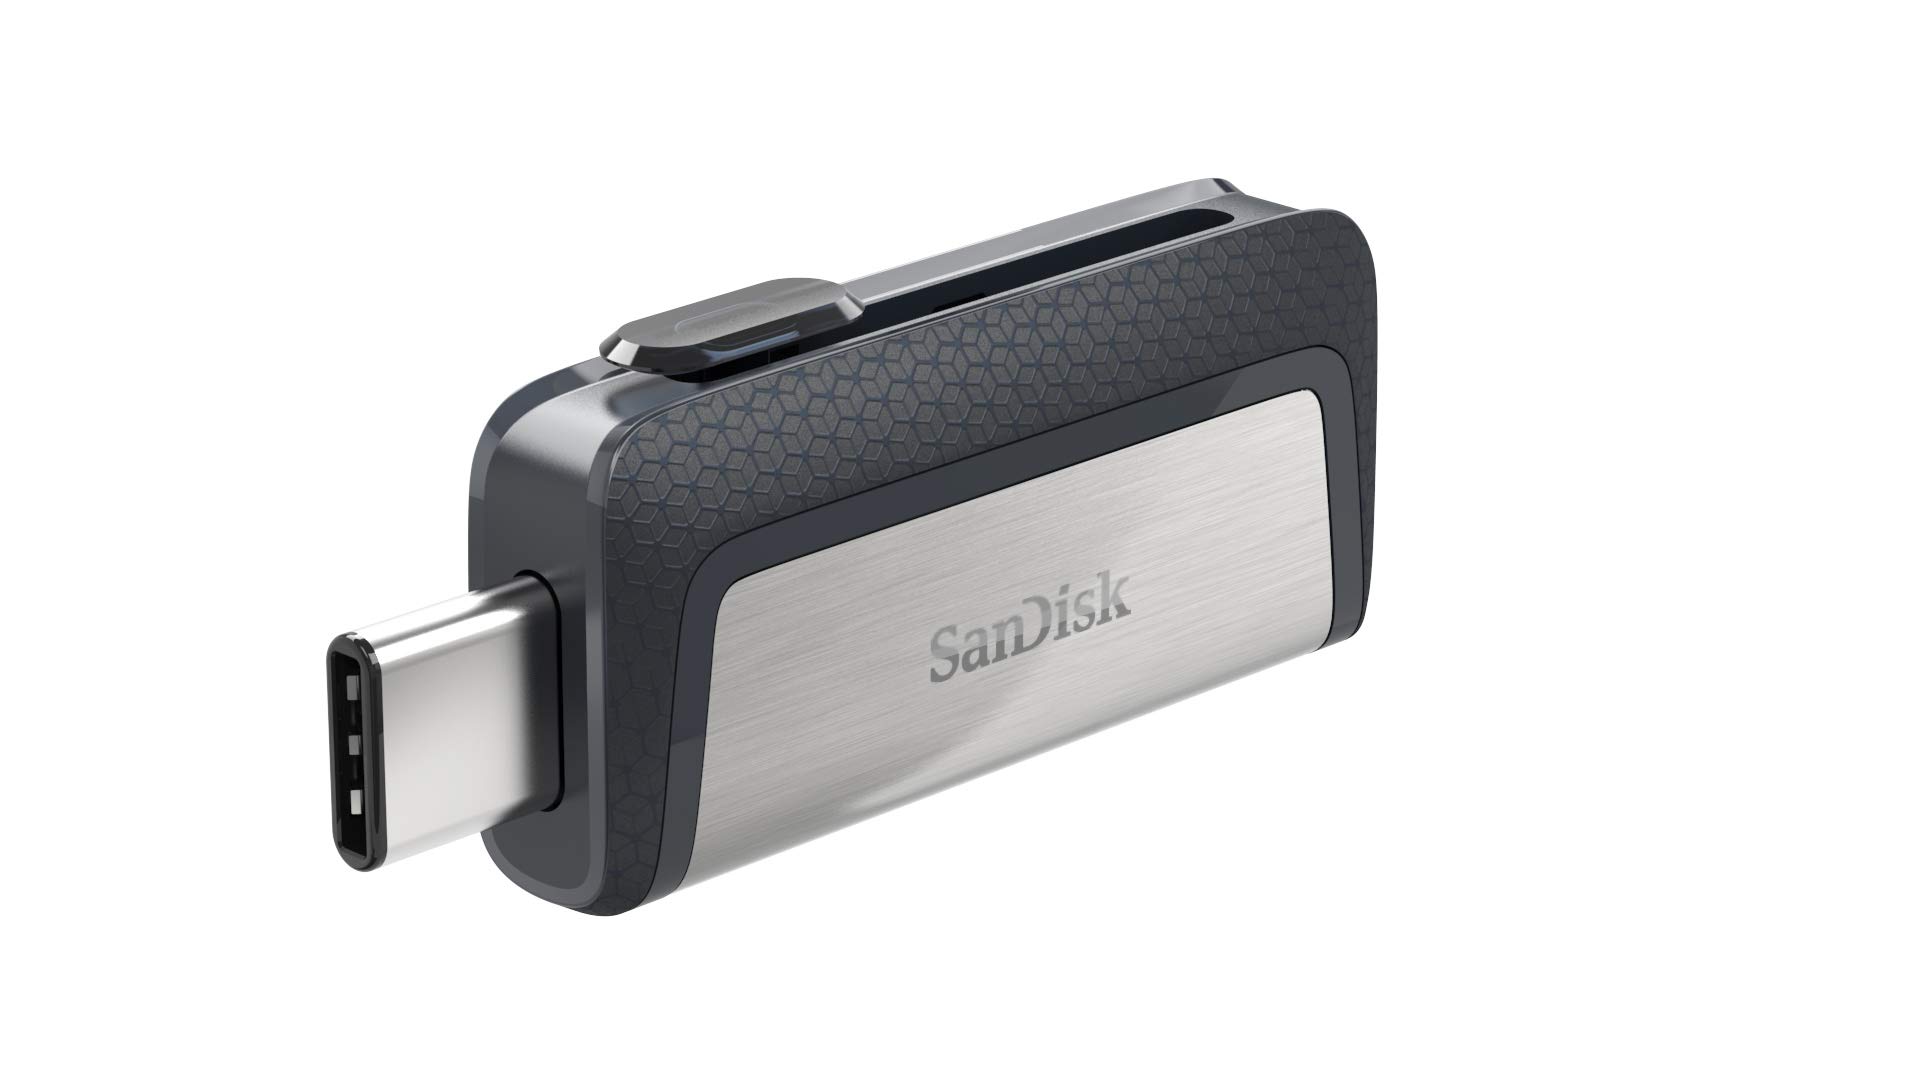 128GB SanDisk Ultra Dual Drive USB Type-C and USB 3.1 Connectors (SDDDC2-128G-G46) $10.19  + Free Shipping w/ Prime or on $35+